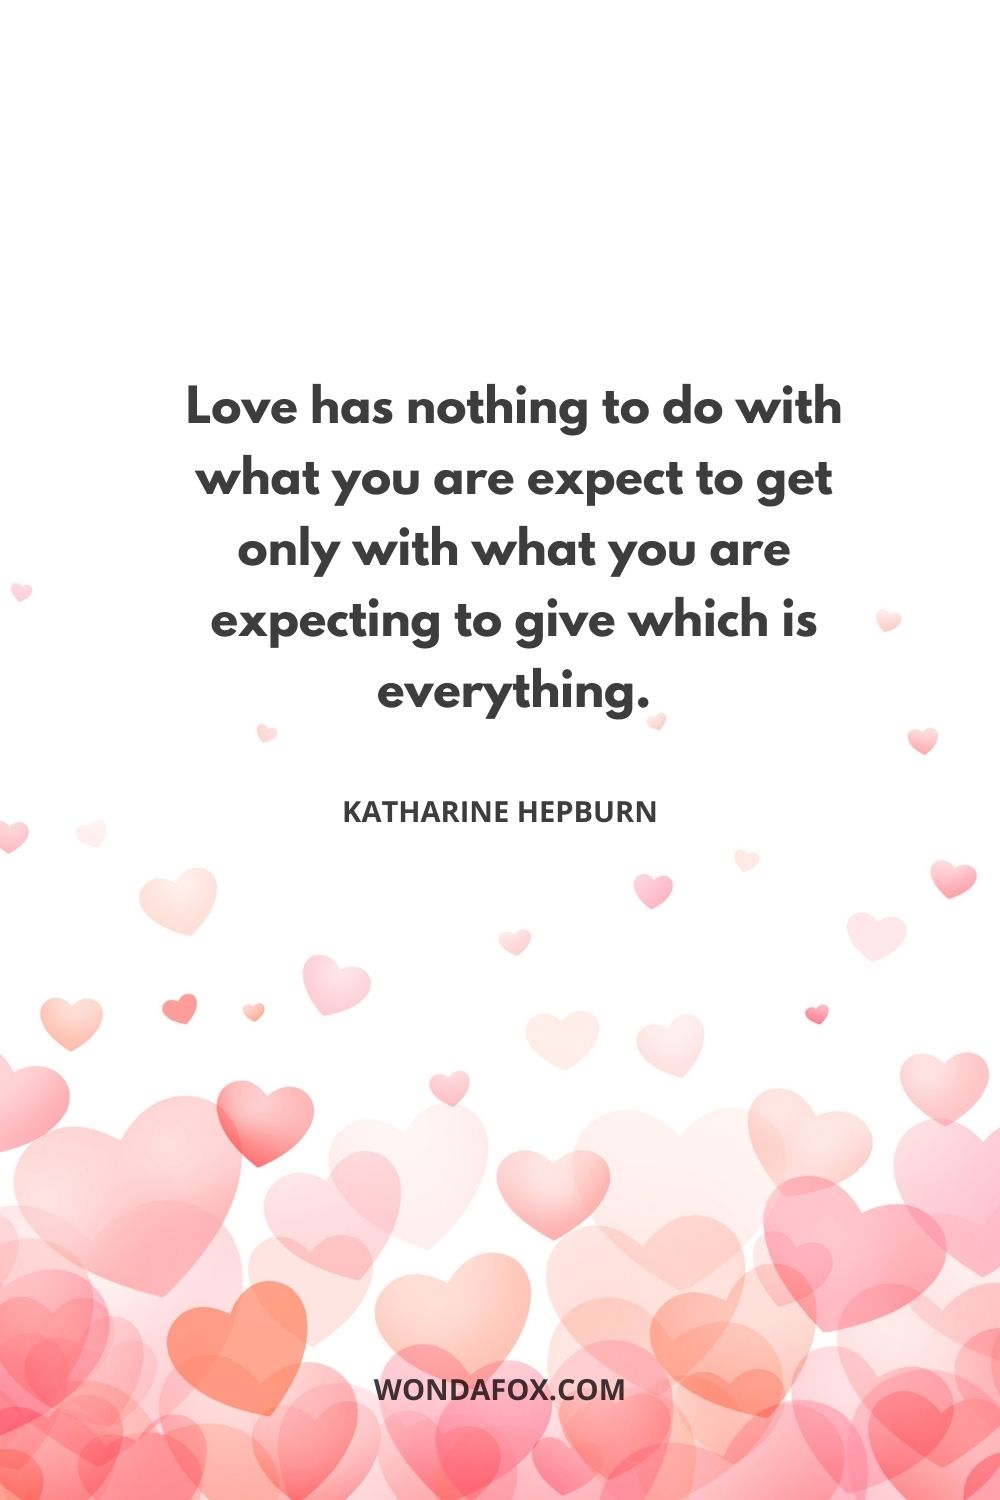 Love has nothing to do with what you are expect to get only with what you are expecting to give which is everything.